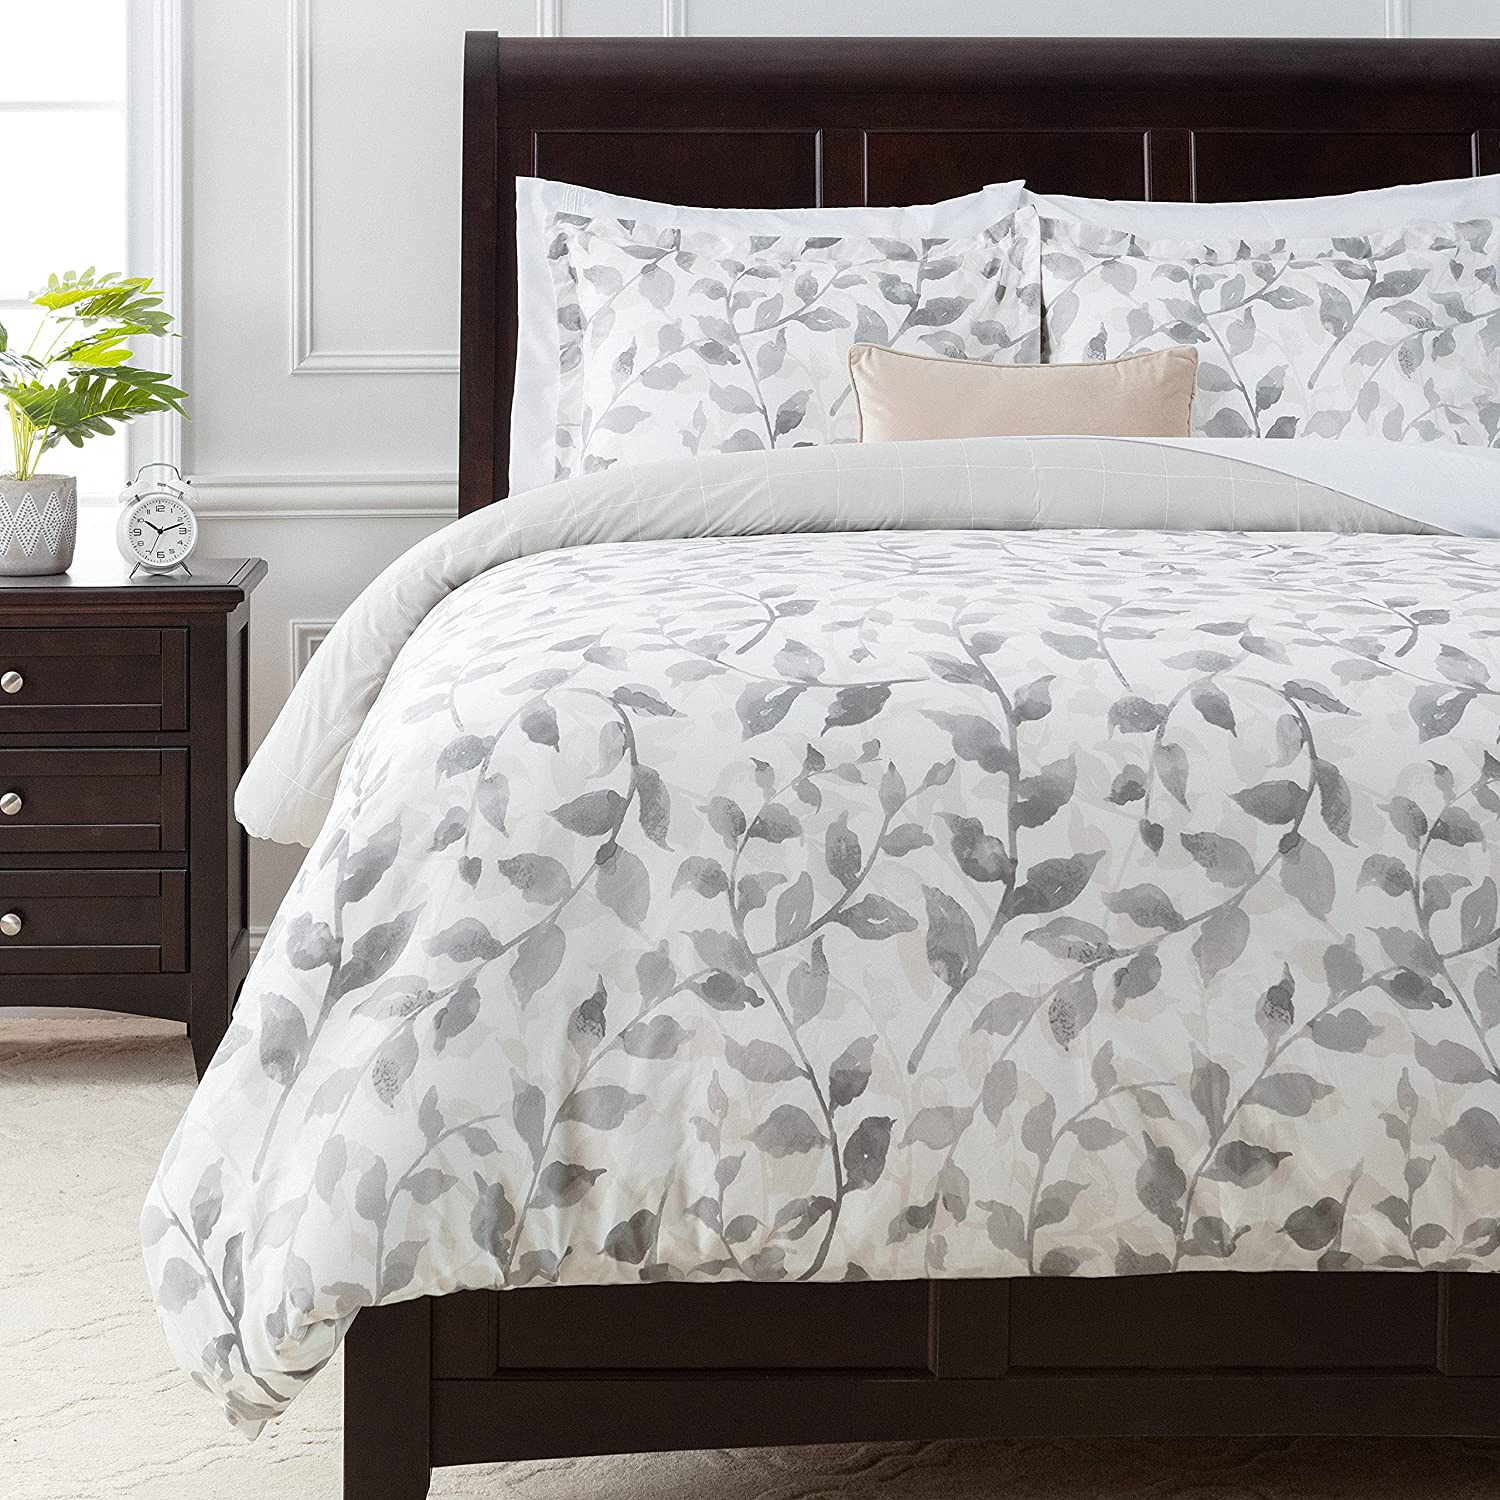 Price:$34.99  Duvet Cover Queen Set Ultra Soft Layered Leaf Print 3-Piece Reversible Bedding - Brushed Microfiber Comforter Cover - Zipper Closure (1 Duvet Cover & 2 Pillow Shams) Gray Creme - Queen : Home & Kitchen